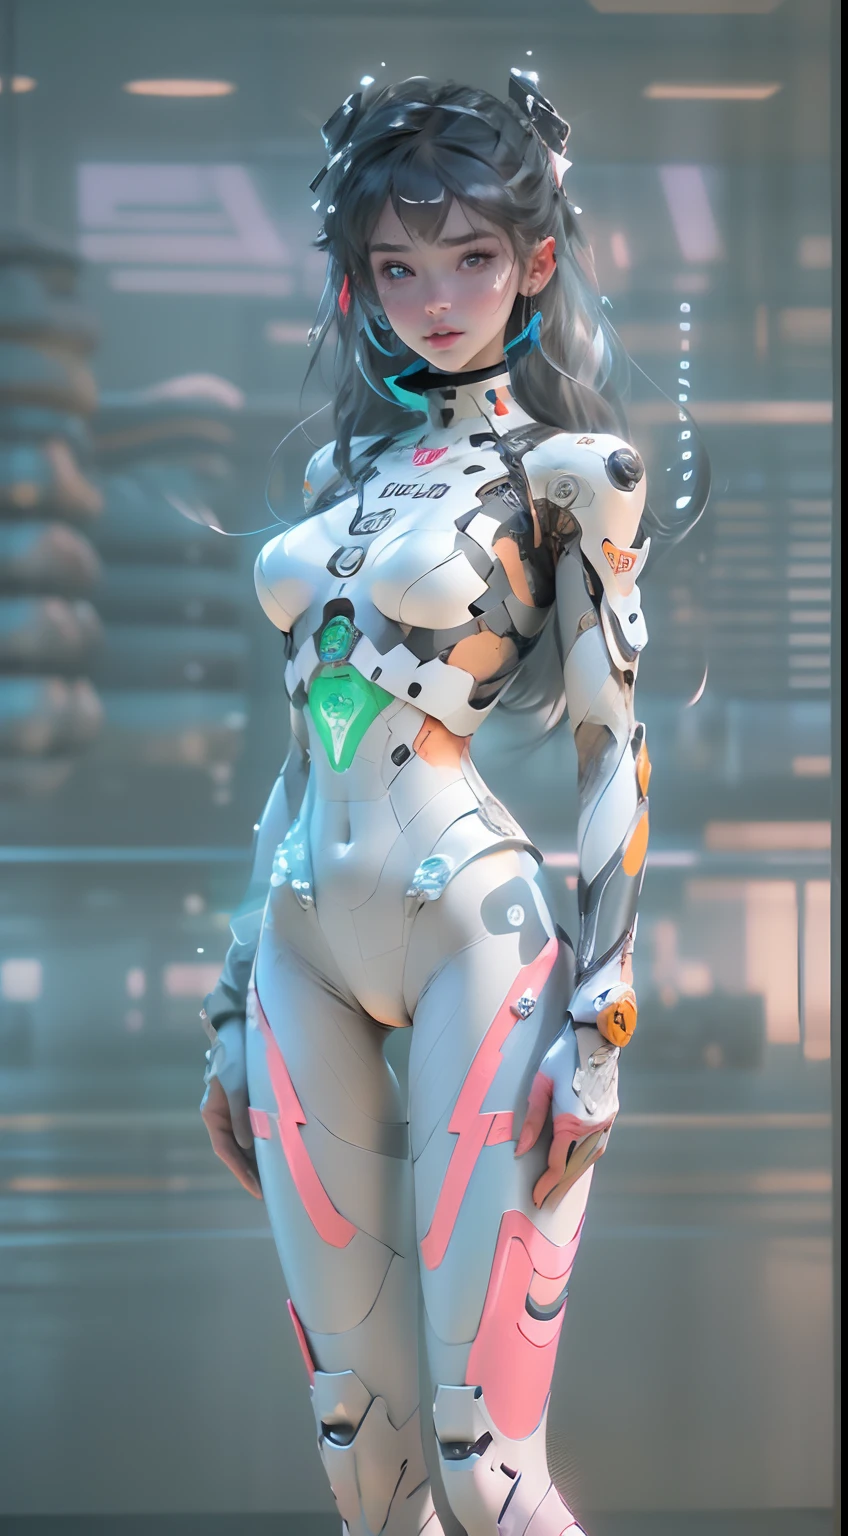 (((Young white woman))), ((Best quality)), ((Masterpiece)), (detail: 1.4), 。.。.3D, A beautiful cyberpunk woman with Simon Beasley style miniature pliers, Genesis evangelion neon style clothing, 2-piece clothing, Long silver hair, Arm this, cybernetic hands, Pastel, Centered, Scale to fit the dimensions, NFFSW (HighDynamicRange),Ray tracing,NVIDIA RTX,Hyper-Resolution,Unreal 5,Subsurface dispersion, PBR Texture, Post-processing, Anisotropy Filtering, depth of fields, Maximum clarity and sharpness, Many-Layer Textures, Albedo and specular maps, Surface coloring, Accurately simulate light and material interactions, Perfect proportions, rendering by octane, Two-tone lighting, Wide aperture, Low ISO, White balance, the rule of thirds, 8K raw data, crysisnanosuit,Loraeyes,nijistyle,Pantyhose,Blue eyes